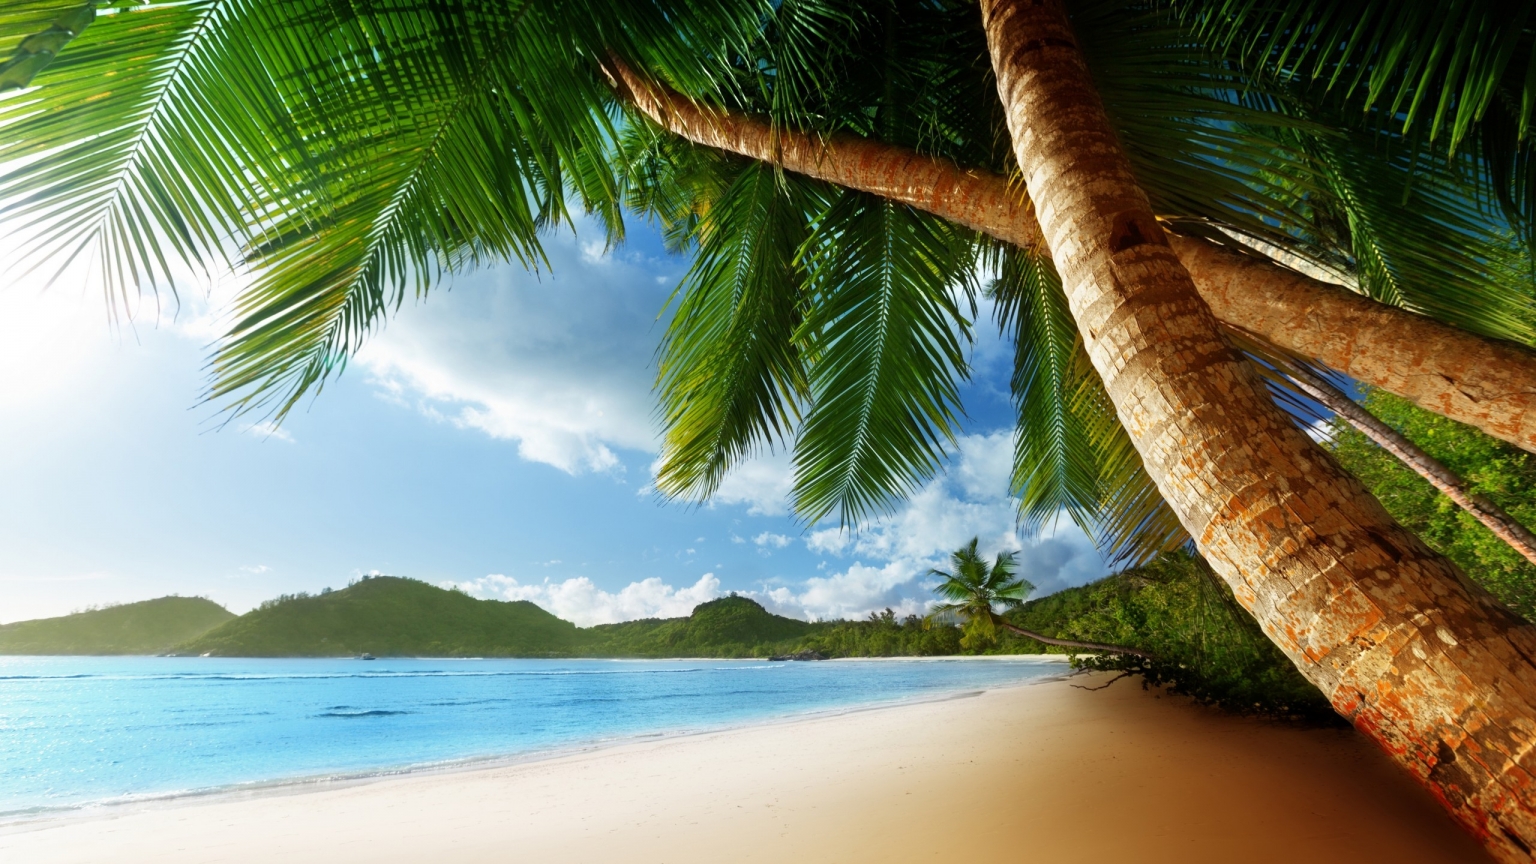 Exotic Palm Island for 1536 x 864 HDTV resolution